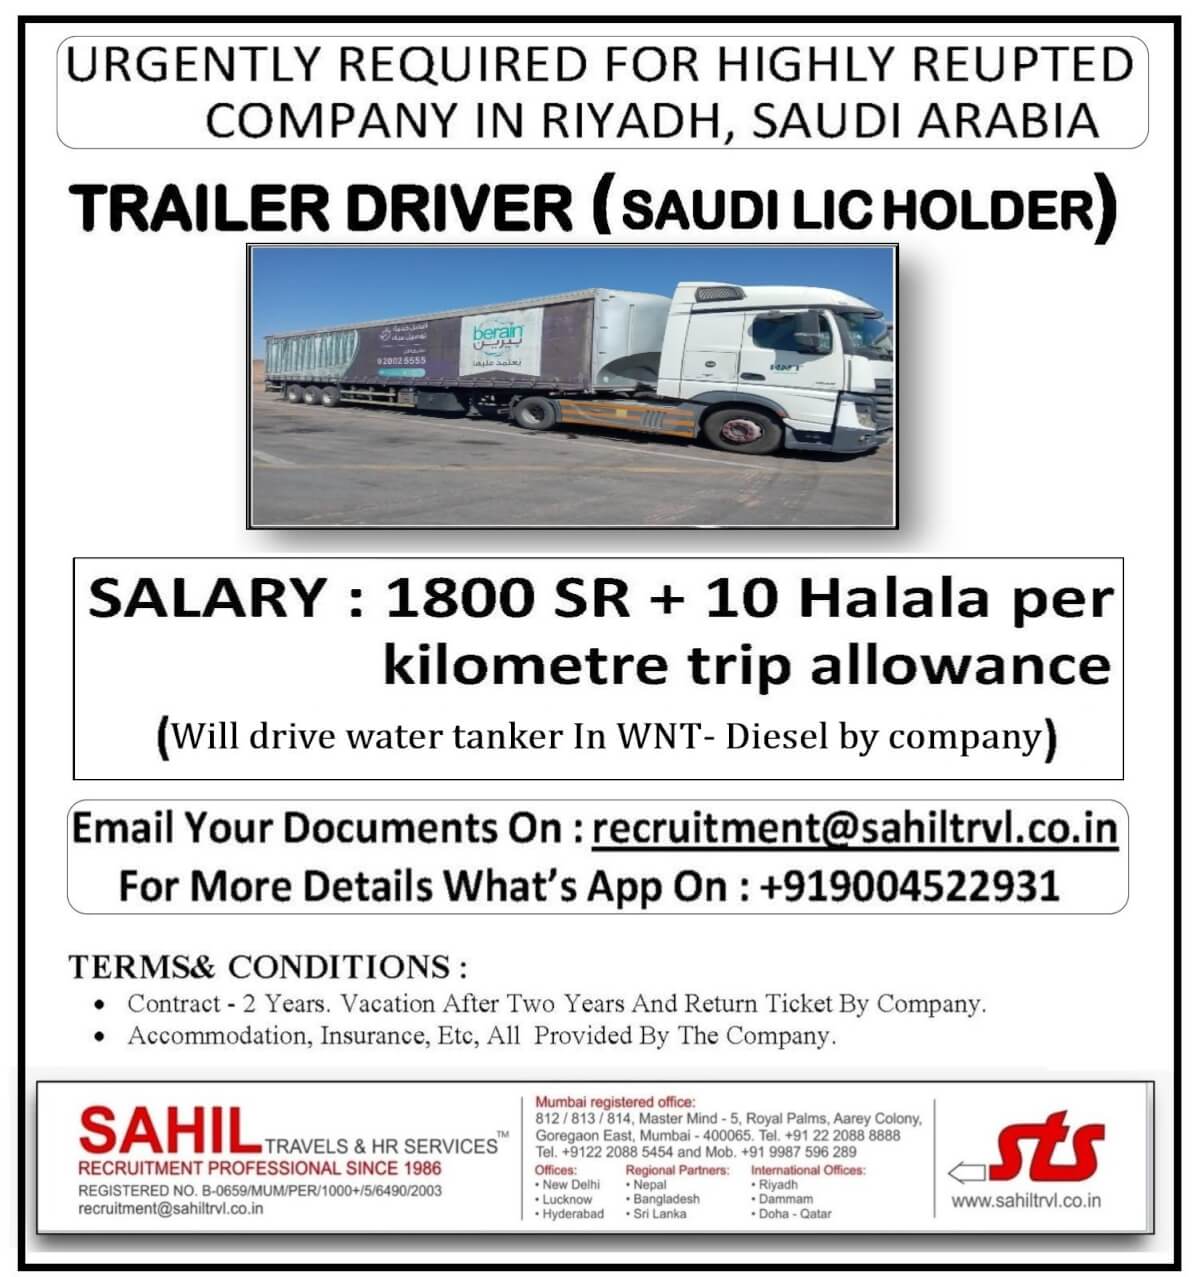 URGENTlY REQUIRED FOR HIGHLY REPUTED COMPANY IN RIYADH , SAUDI AREBIA